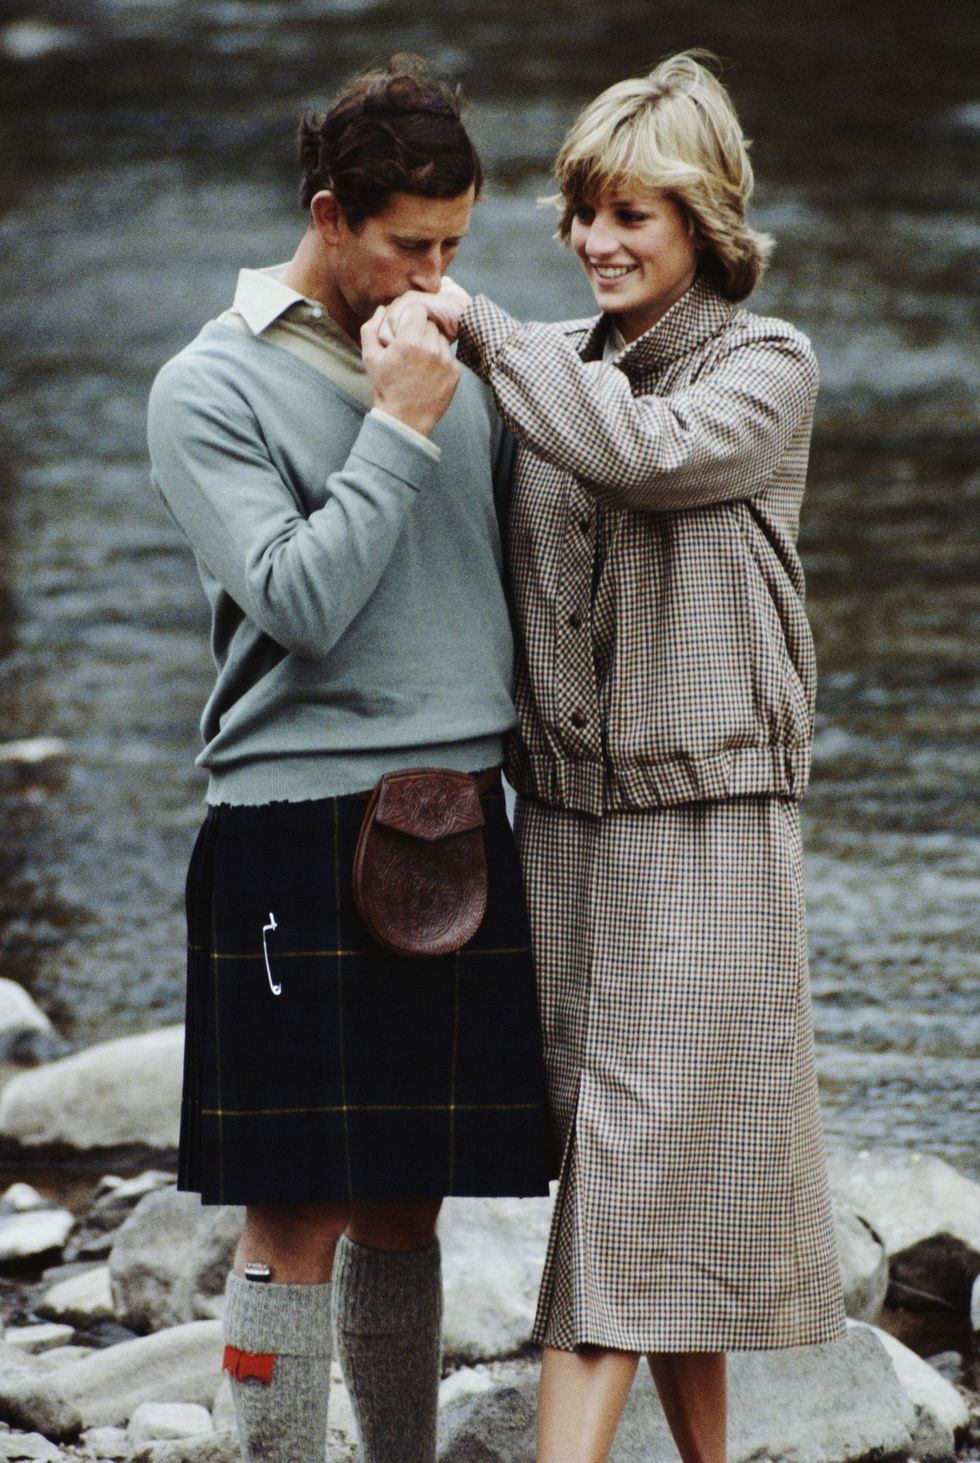 <p>Prince Charles and Diana, Princess of Wales pose together during their honeymoon in Balmoral, Scotland, 19th August 1981.</p>